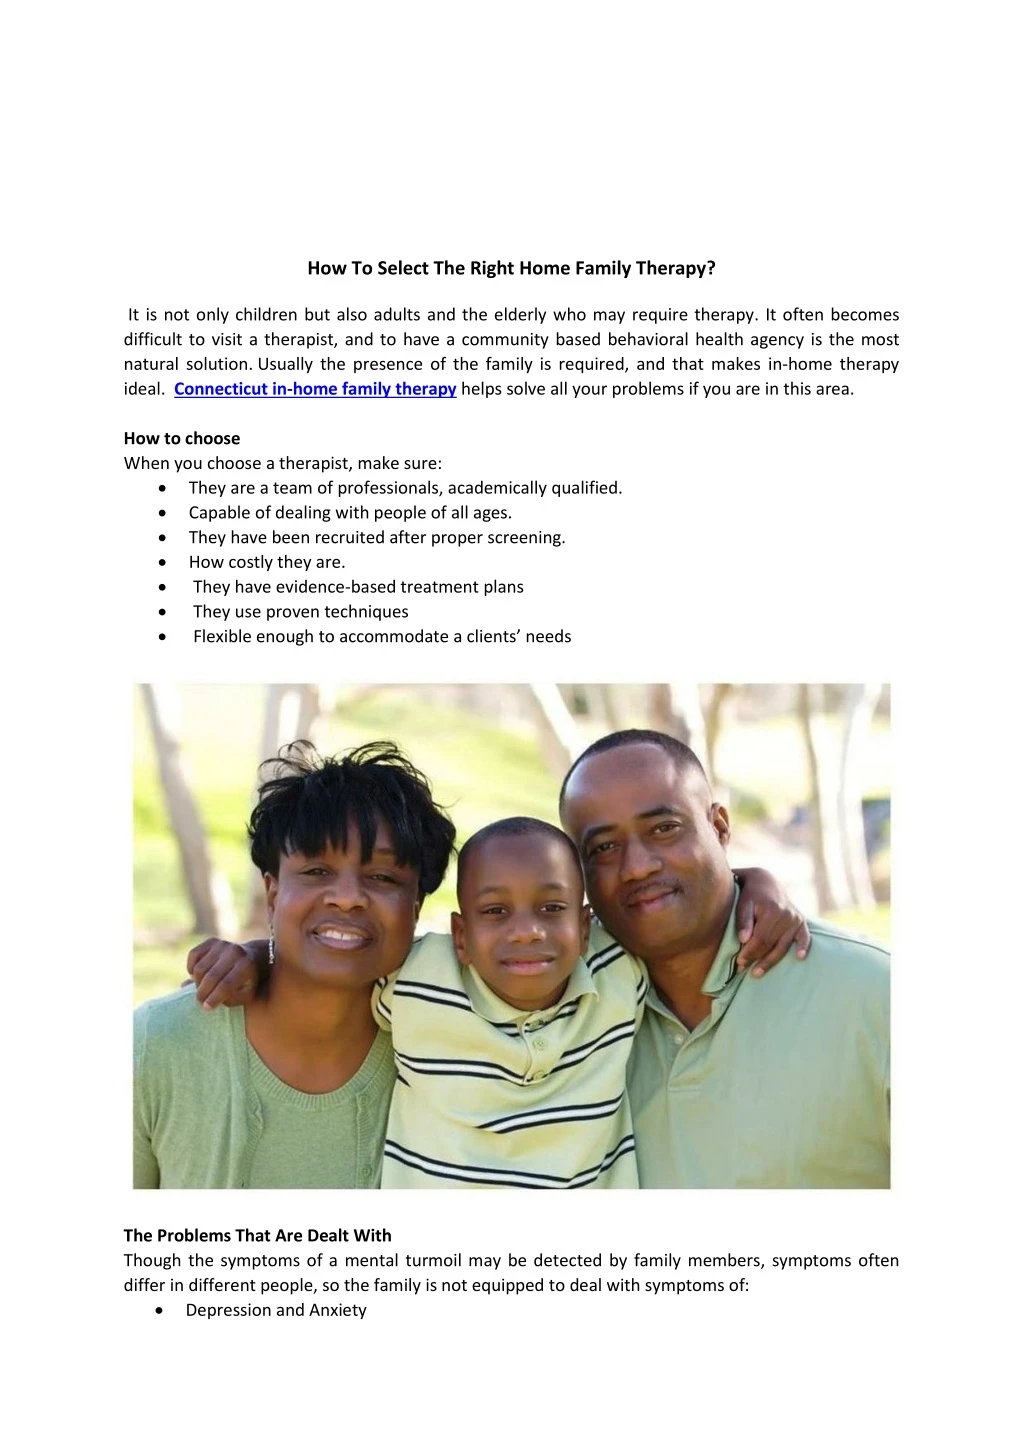 how to select the right home family therapy